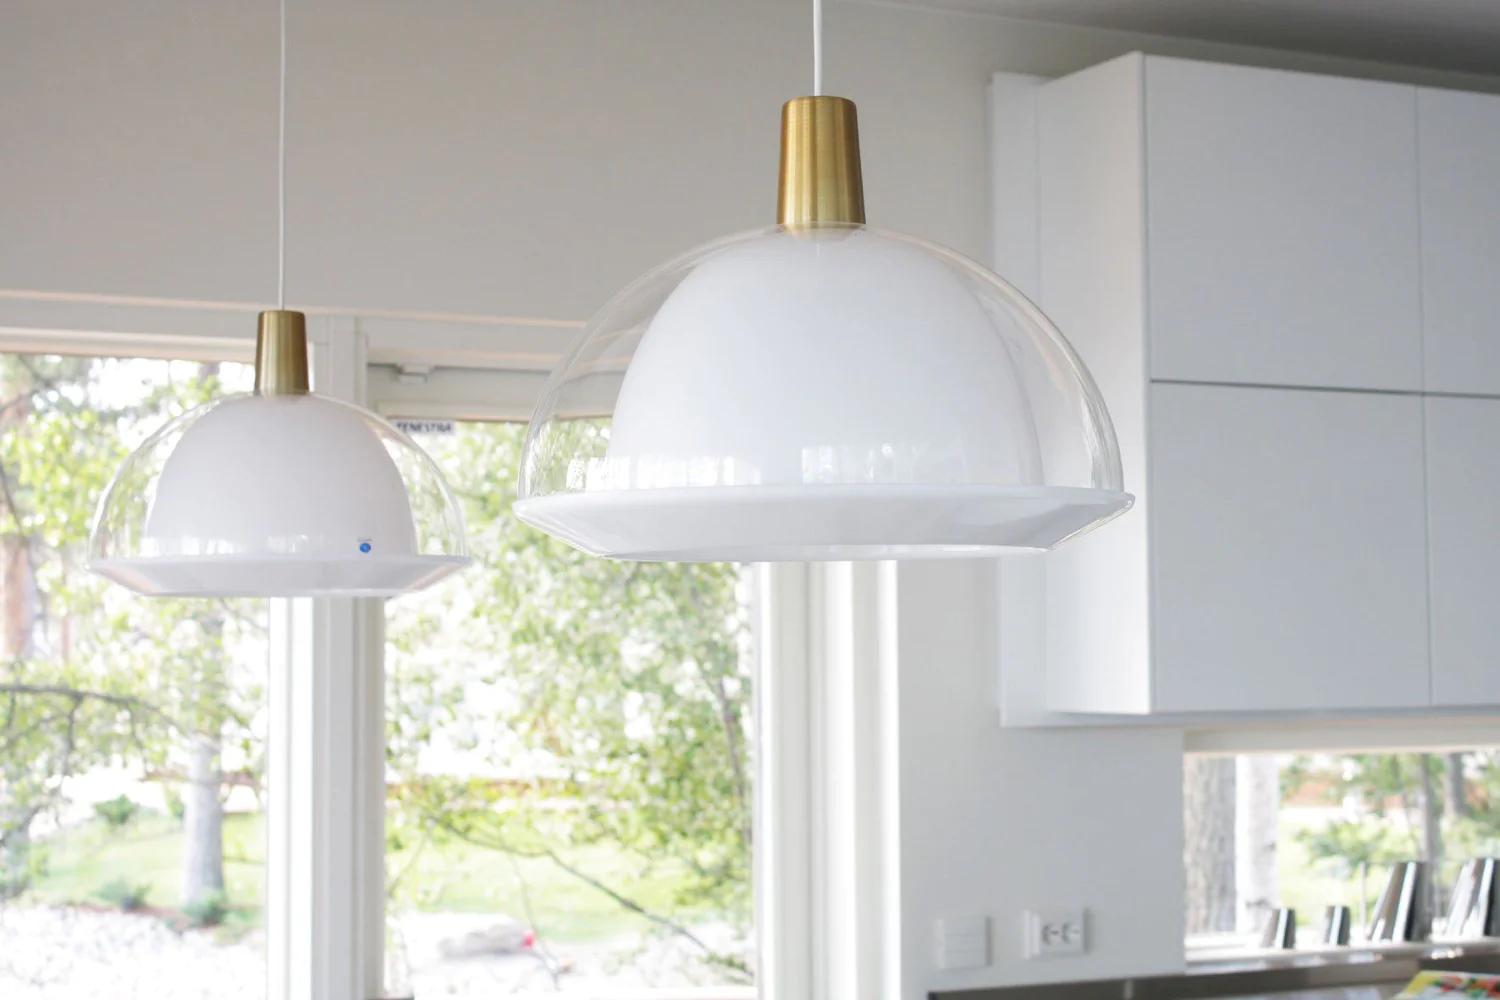 Pair of Yki Nummi Transparent 'Kuplat' Pendants. Designed in 1959, Nummi's iconic light consists of two acrylic shades of different colors, one nesting inside the other. The name Kuplat means bubbles in Finnish. As Nummi once astutely observed,